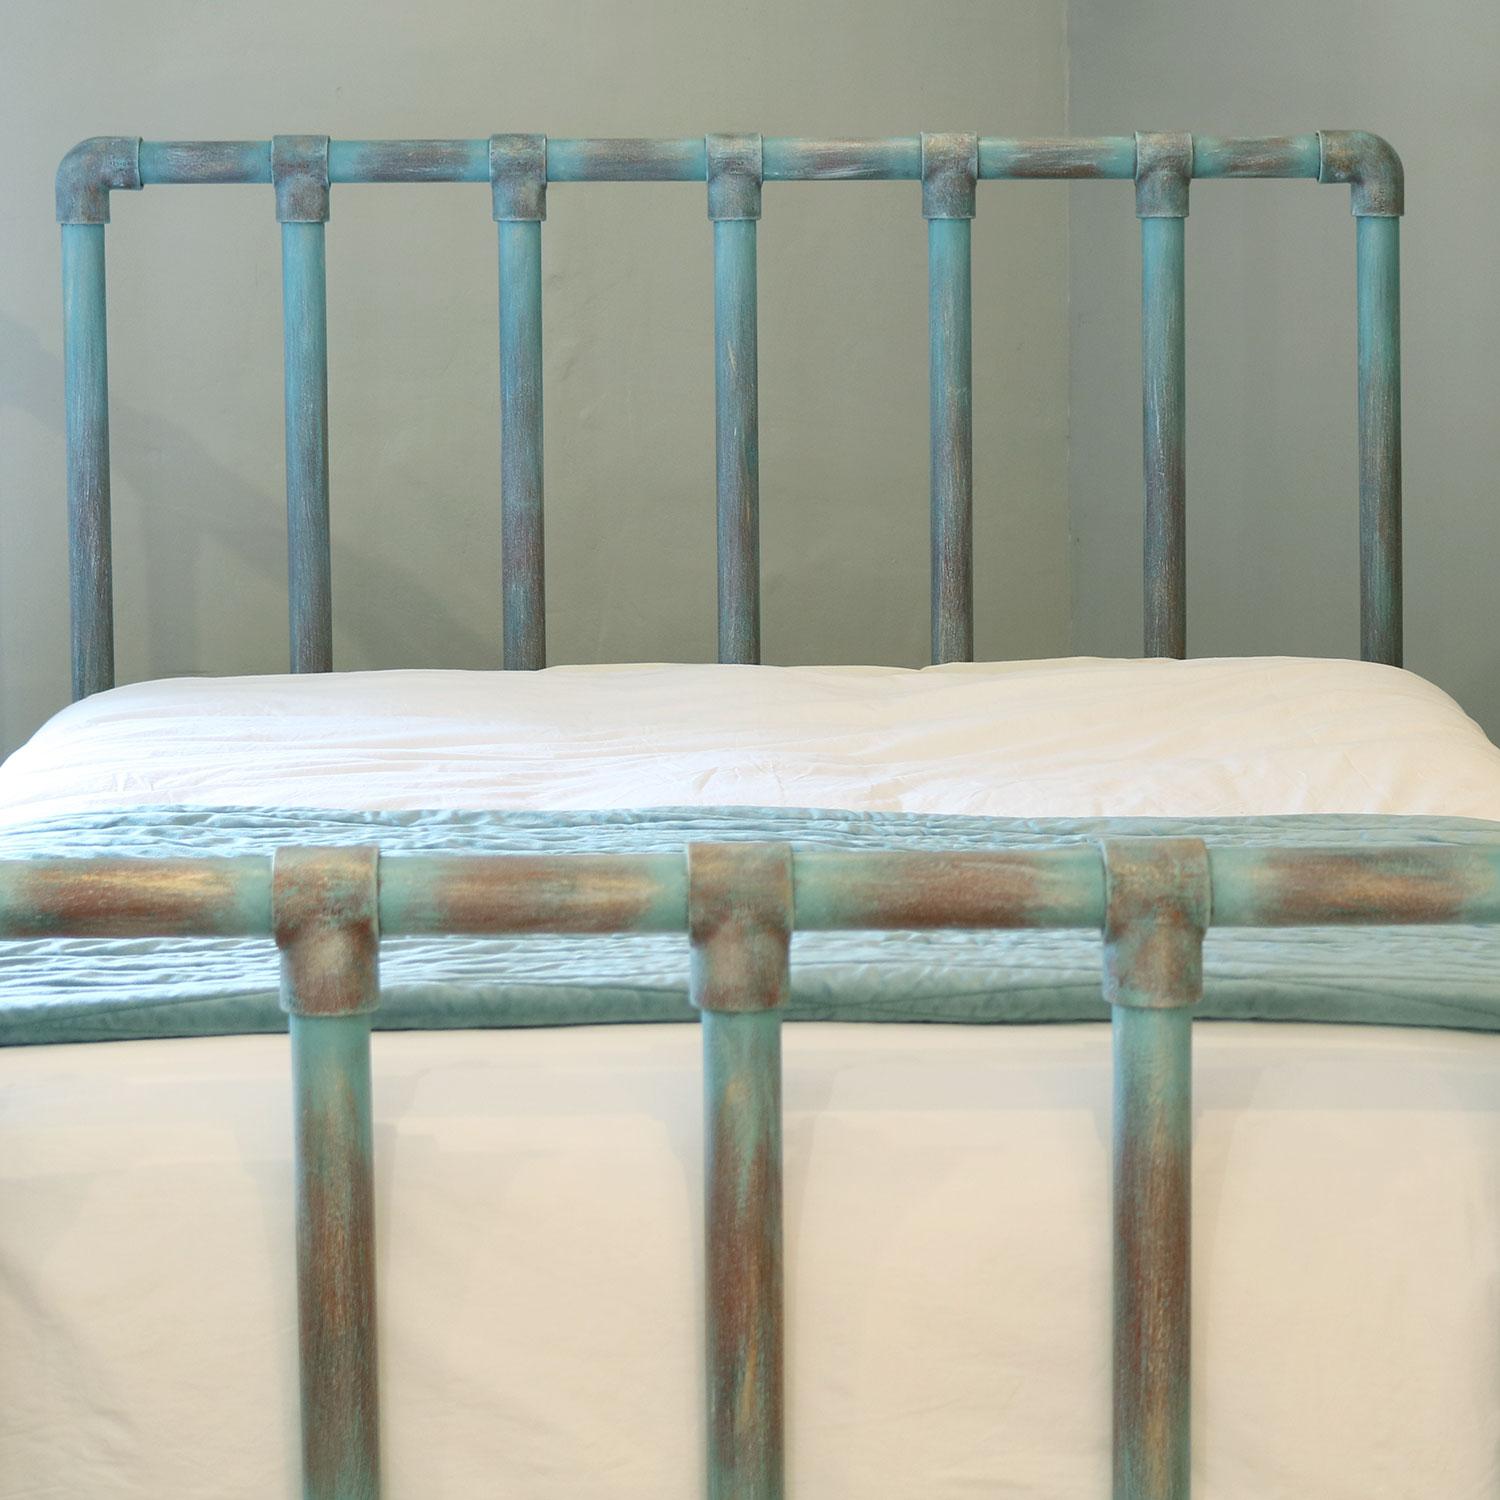 scaffolding bed frame